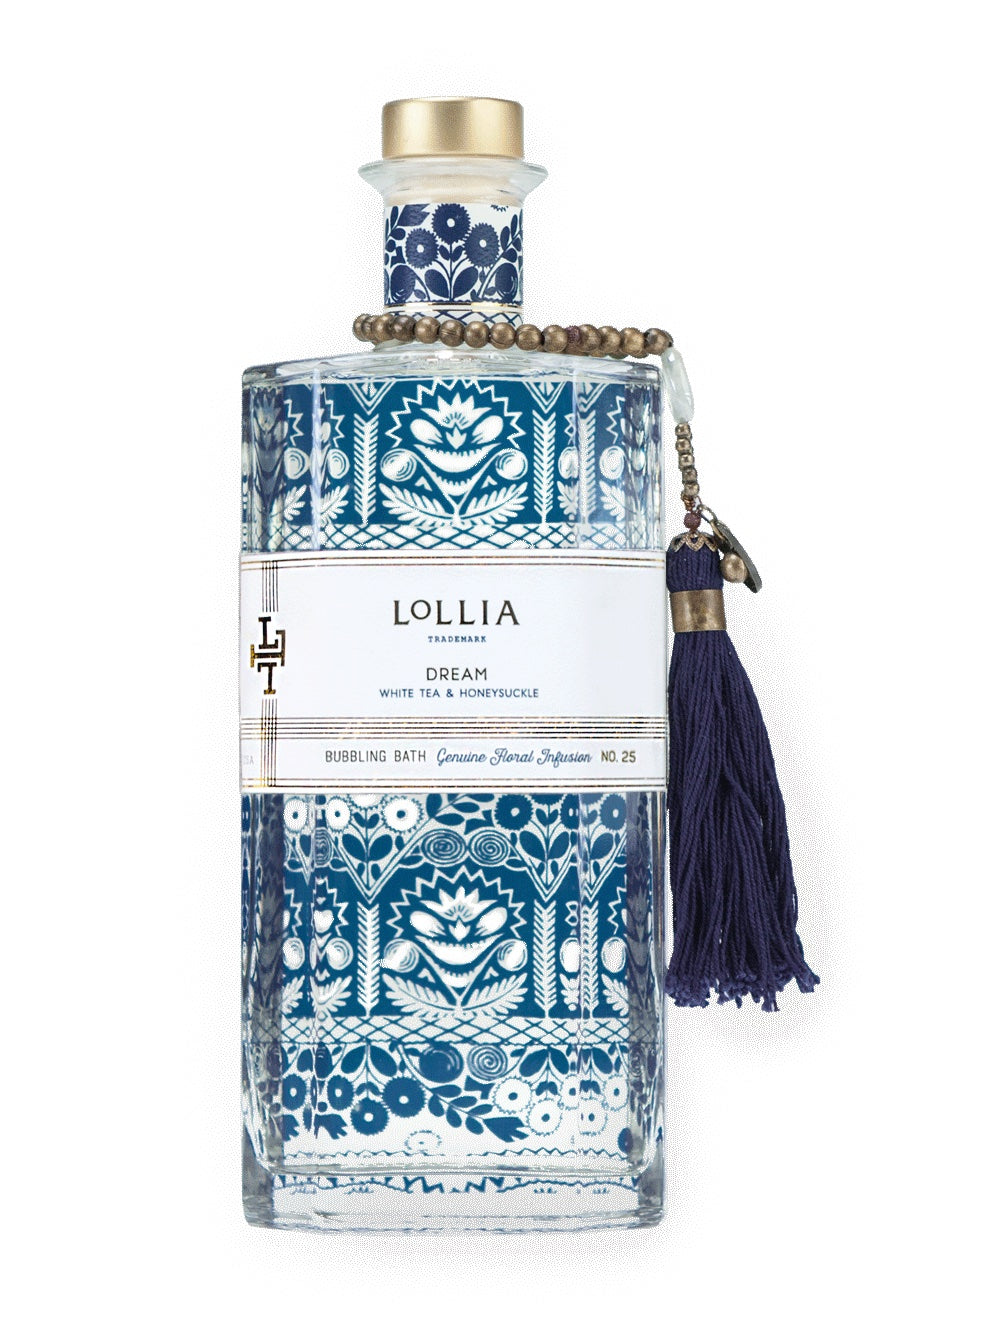 A decorative bottle of Margot Elena Lollia Dream Bubble Bath, featuring intricate blue and white floral patterns and adorned with a navy tassel.